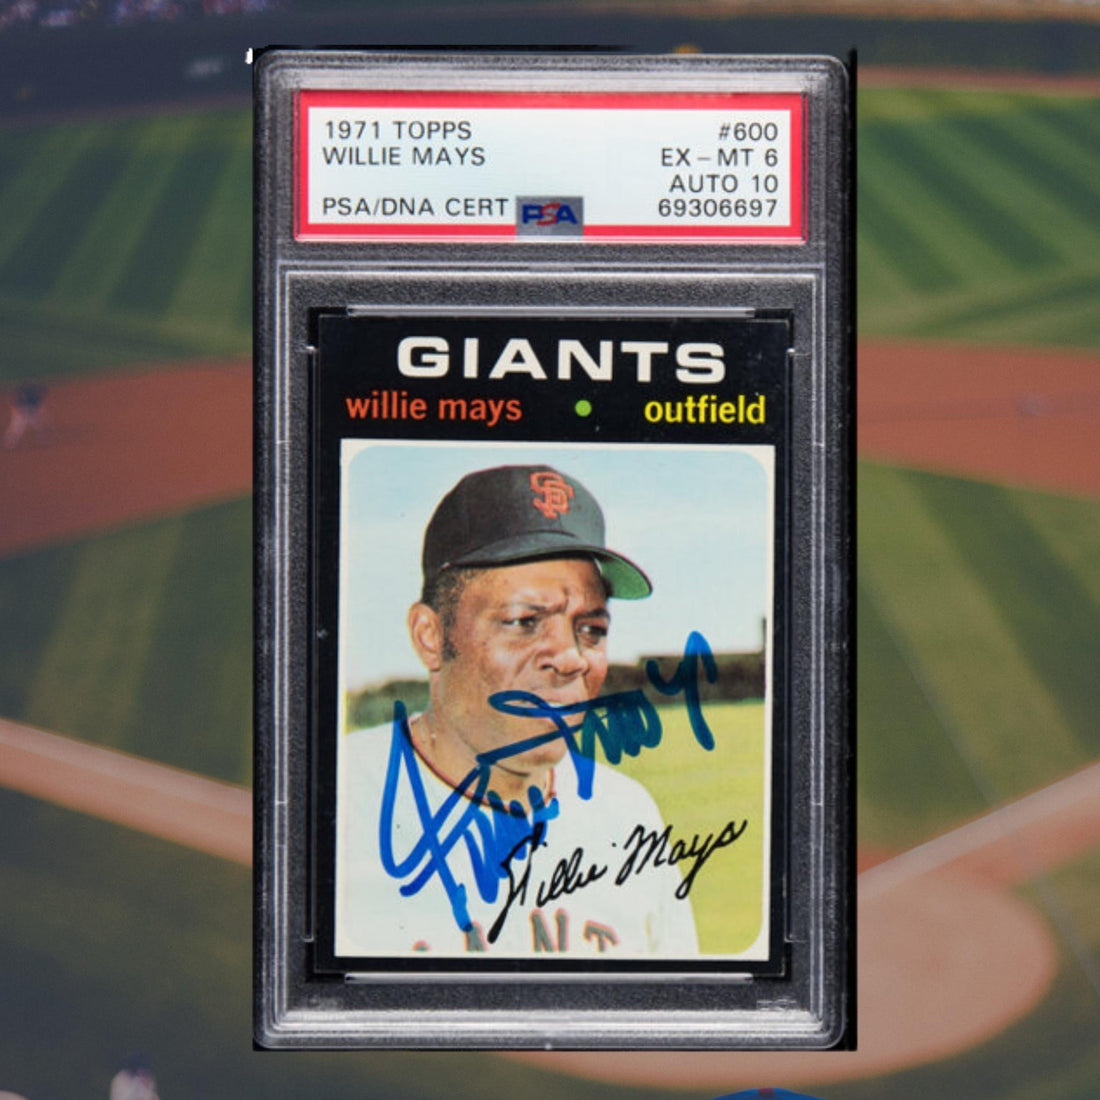 Vintage Autographed Cards Continue to Soar: Willie Mays Signed 1971 Topps Card Shatters Expectations at Heritage Auctions